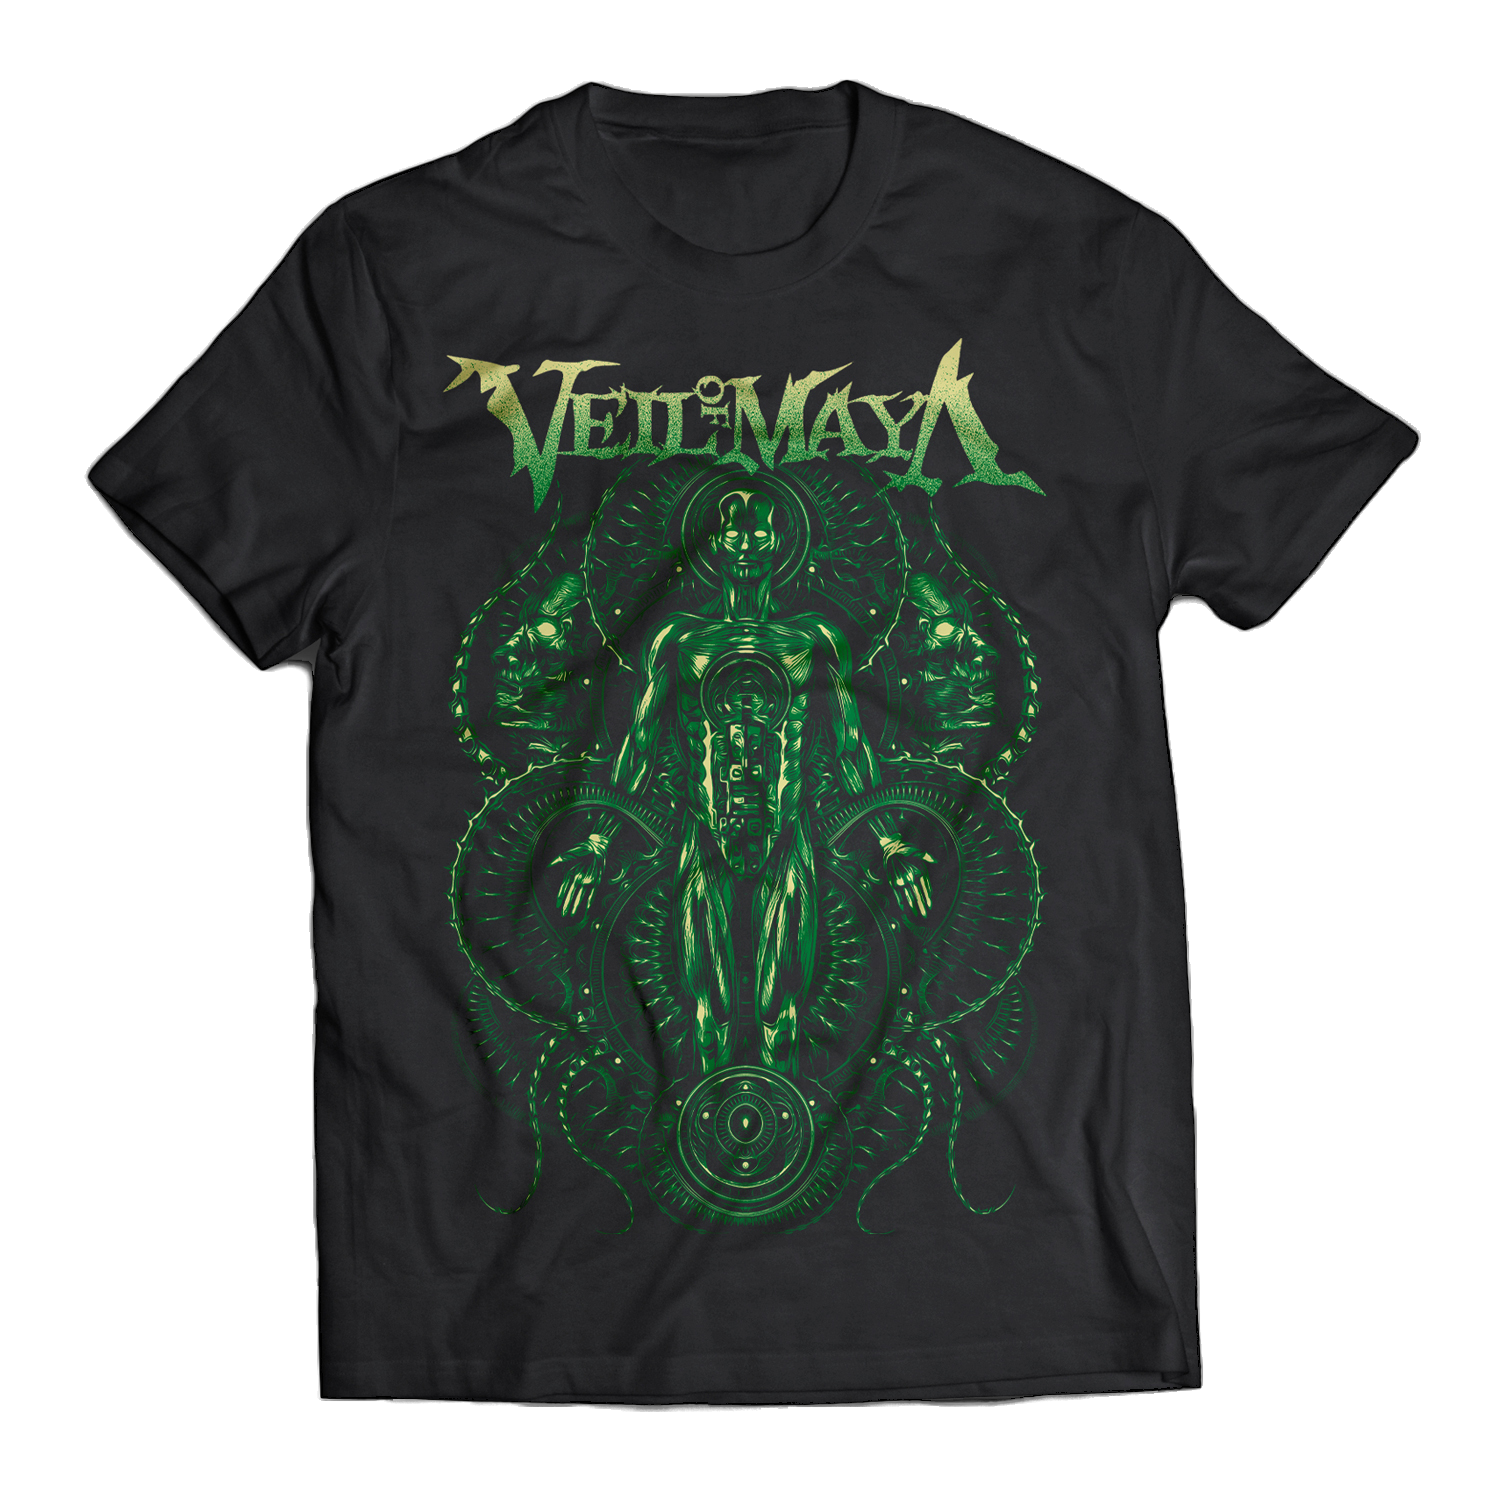 image of a black tee shirt on a transparent background. front of tee has full body print in green of a person with tentacles. across the top says veil of maya